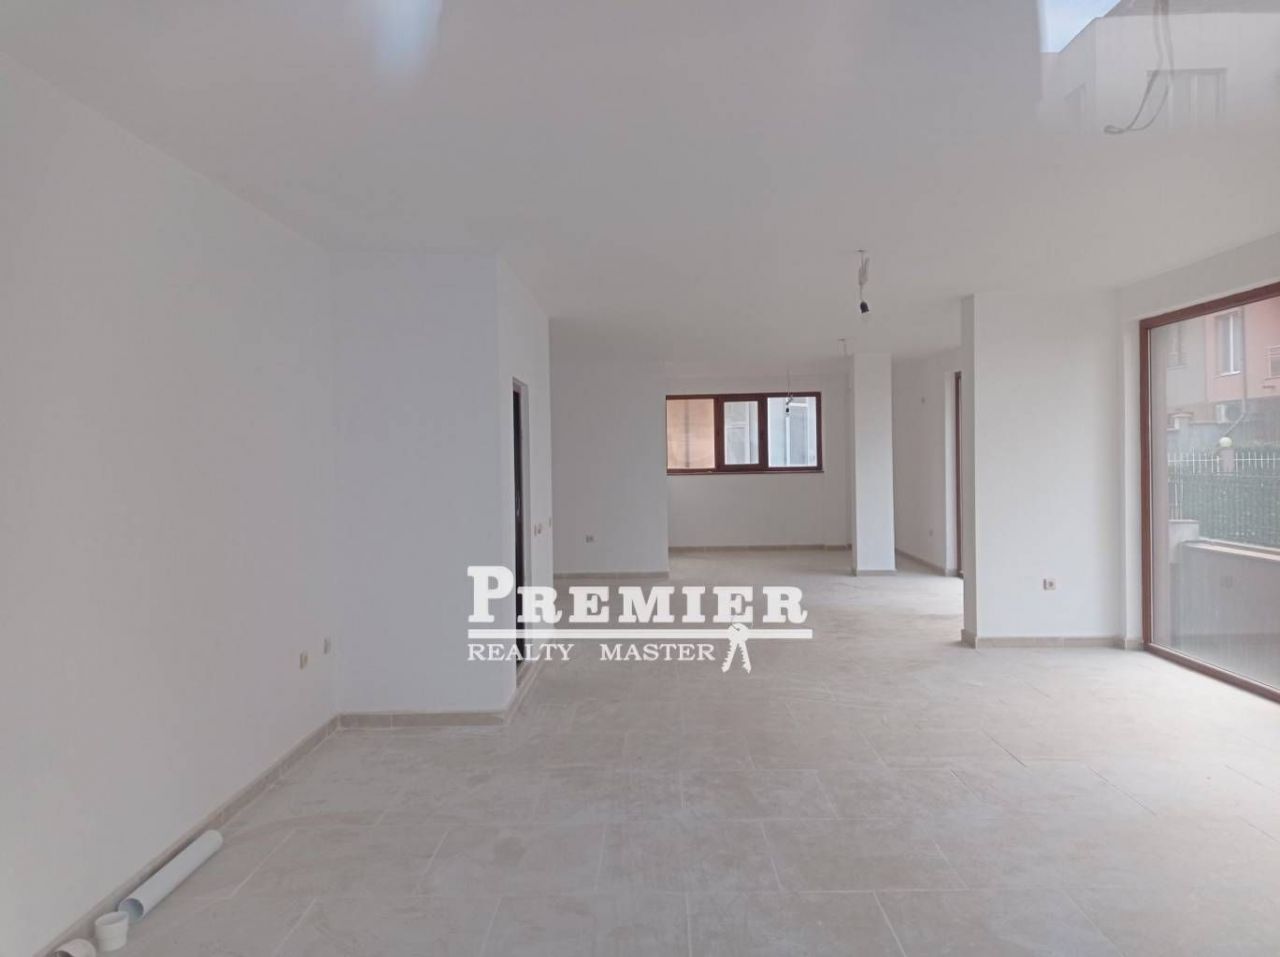 Commercial property in Nesebar, Bulgaria, 96 sq.m - picture 1